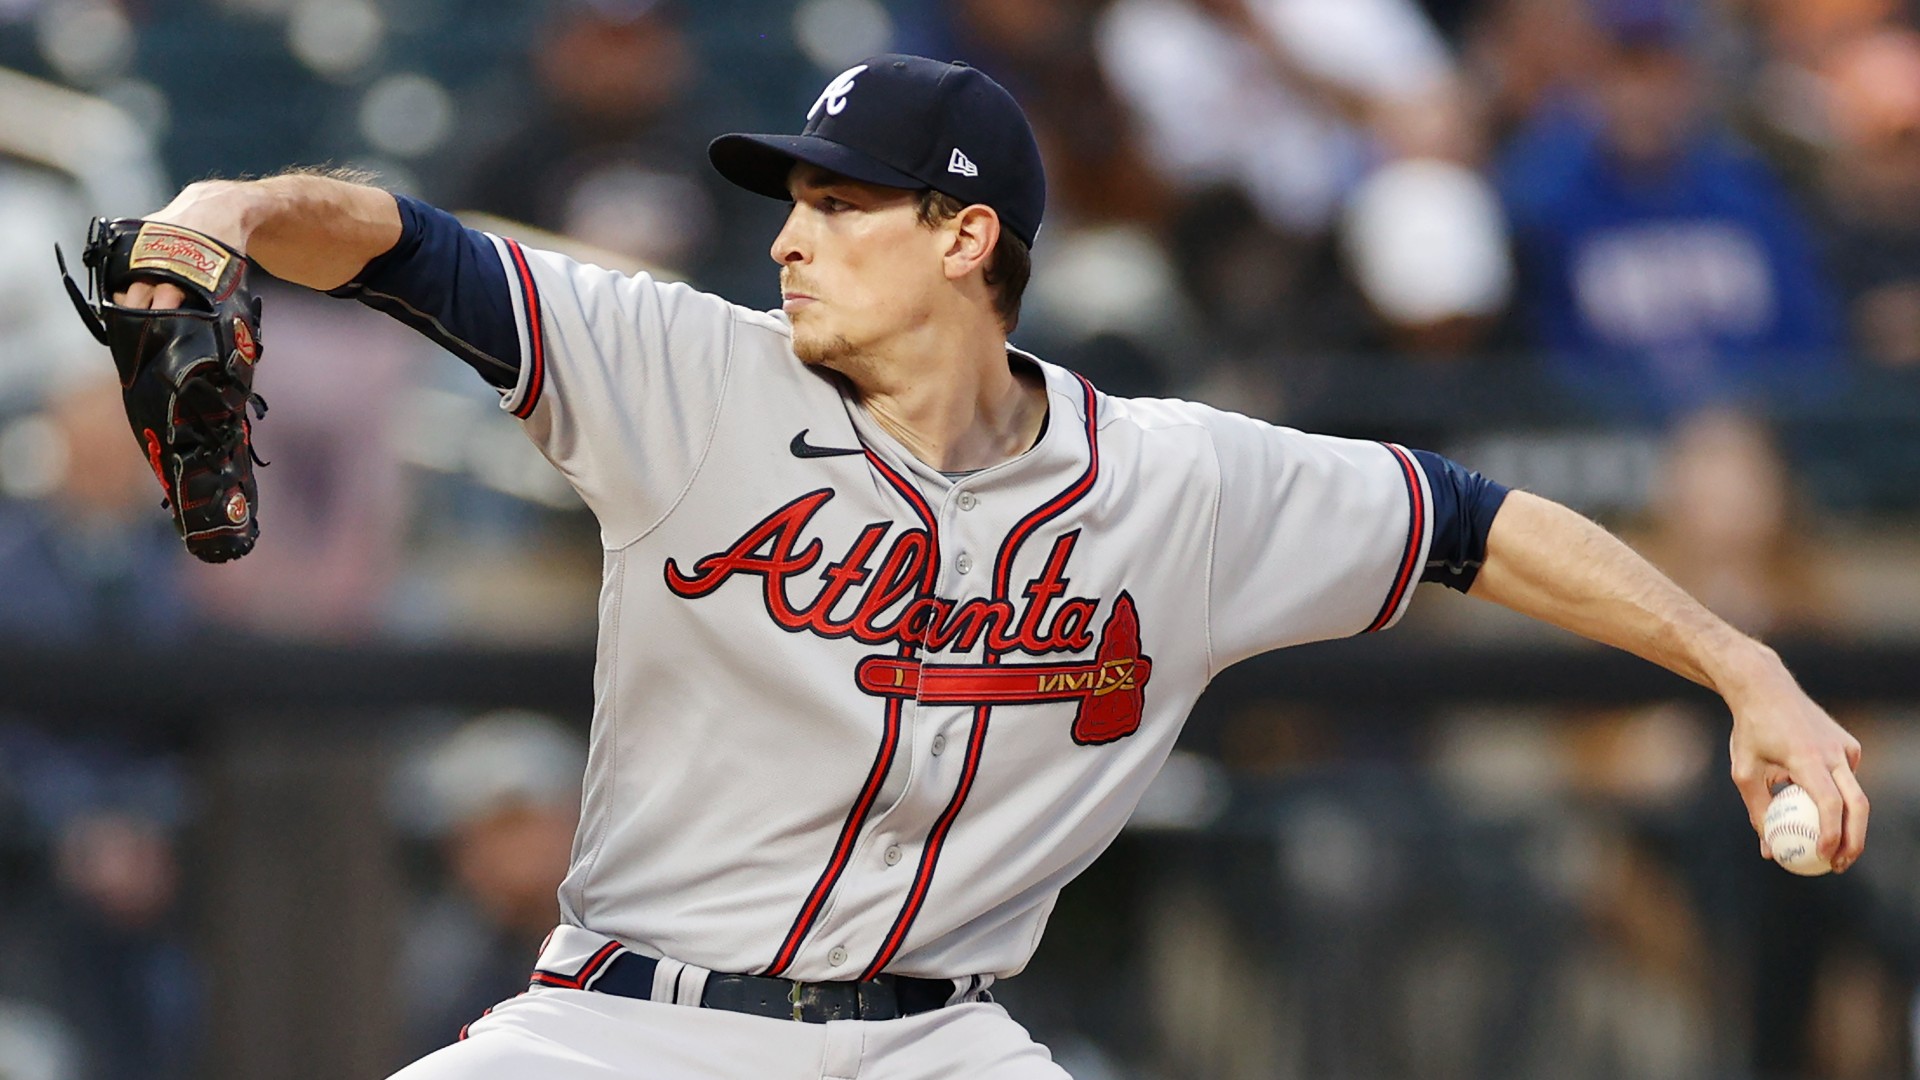 Diamondbacks vs. Braves MLB Odds, Pick & Preview: Expect a Pitching Duel in Atlanta (Sunday, July 31) article feature image